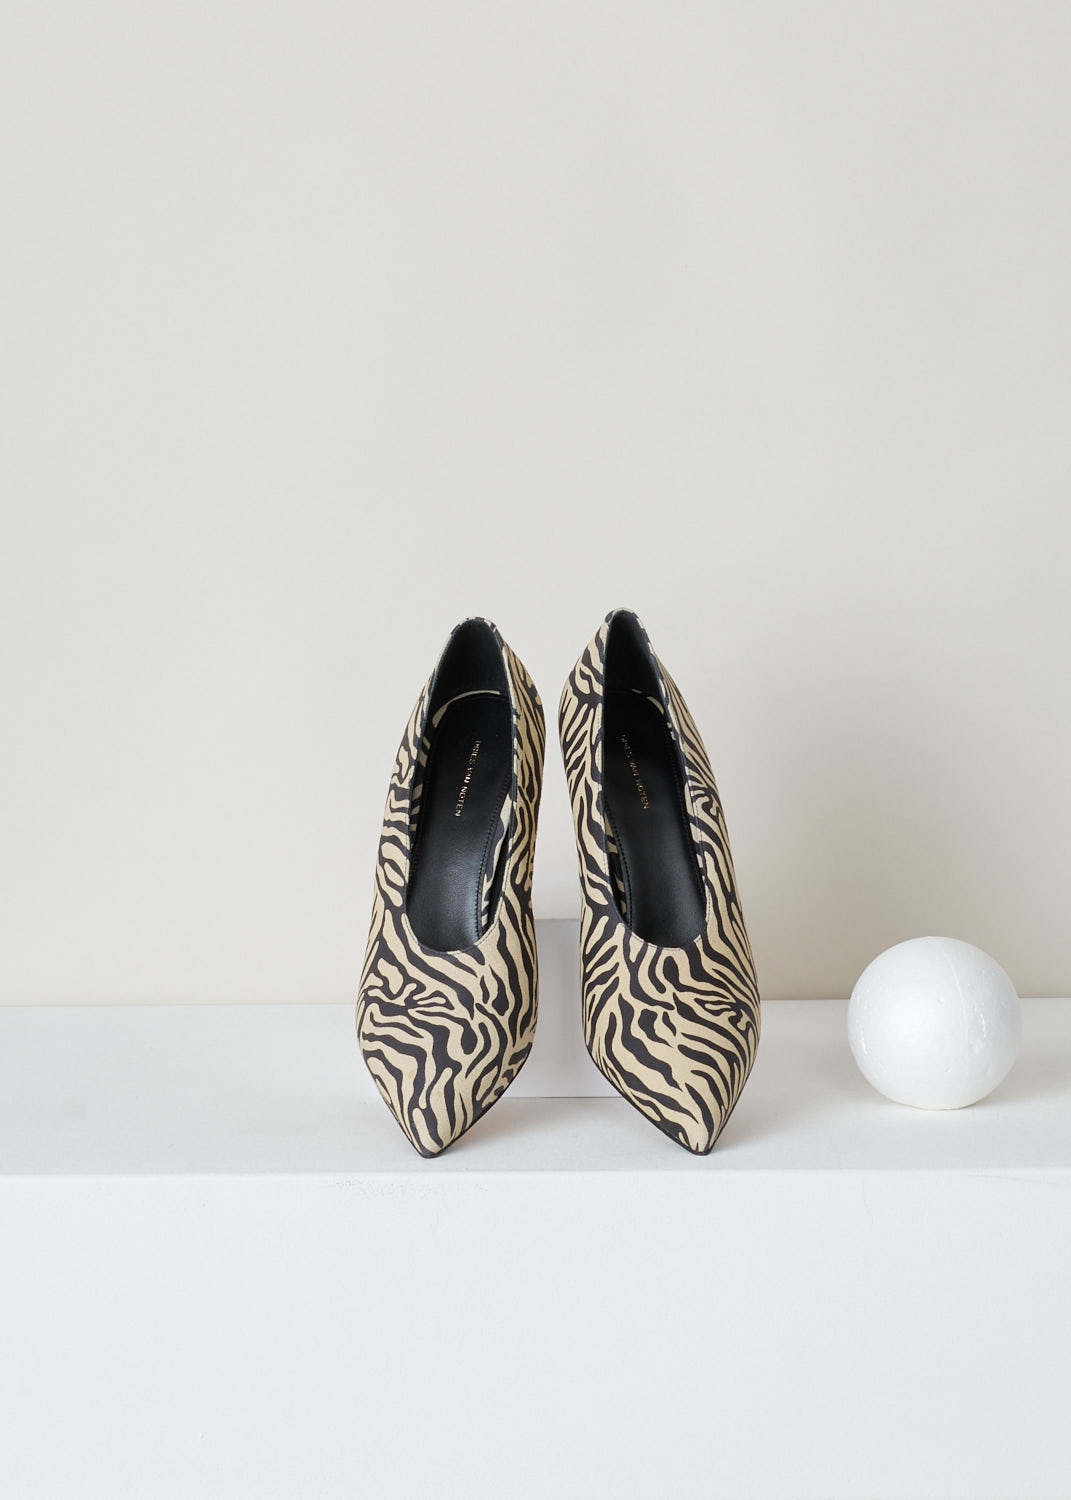 Dries van Noten, Zebra print pumps in black and white, WS27_187_H80_QU102_ECRU005, white black, top, Leather printed with a zebra print, featuring an pointed toe section and tapered heels. this pumps would fit any occasion either with a dress or some pants.

Heel height: 8.5 cm / 3.3 inch. 